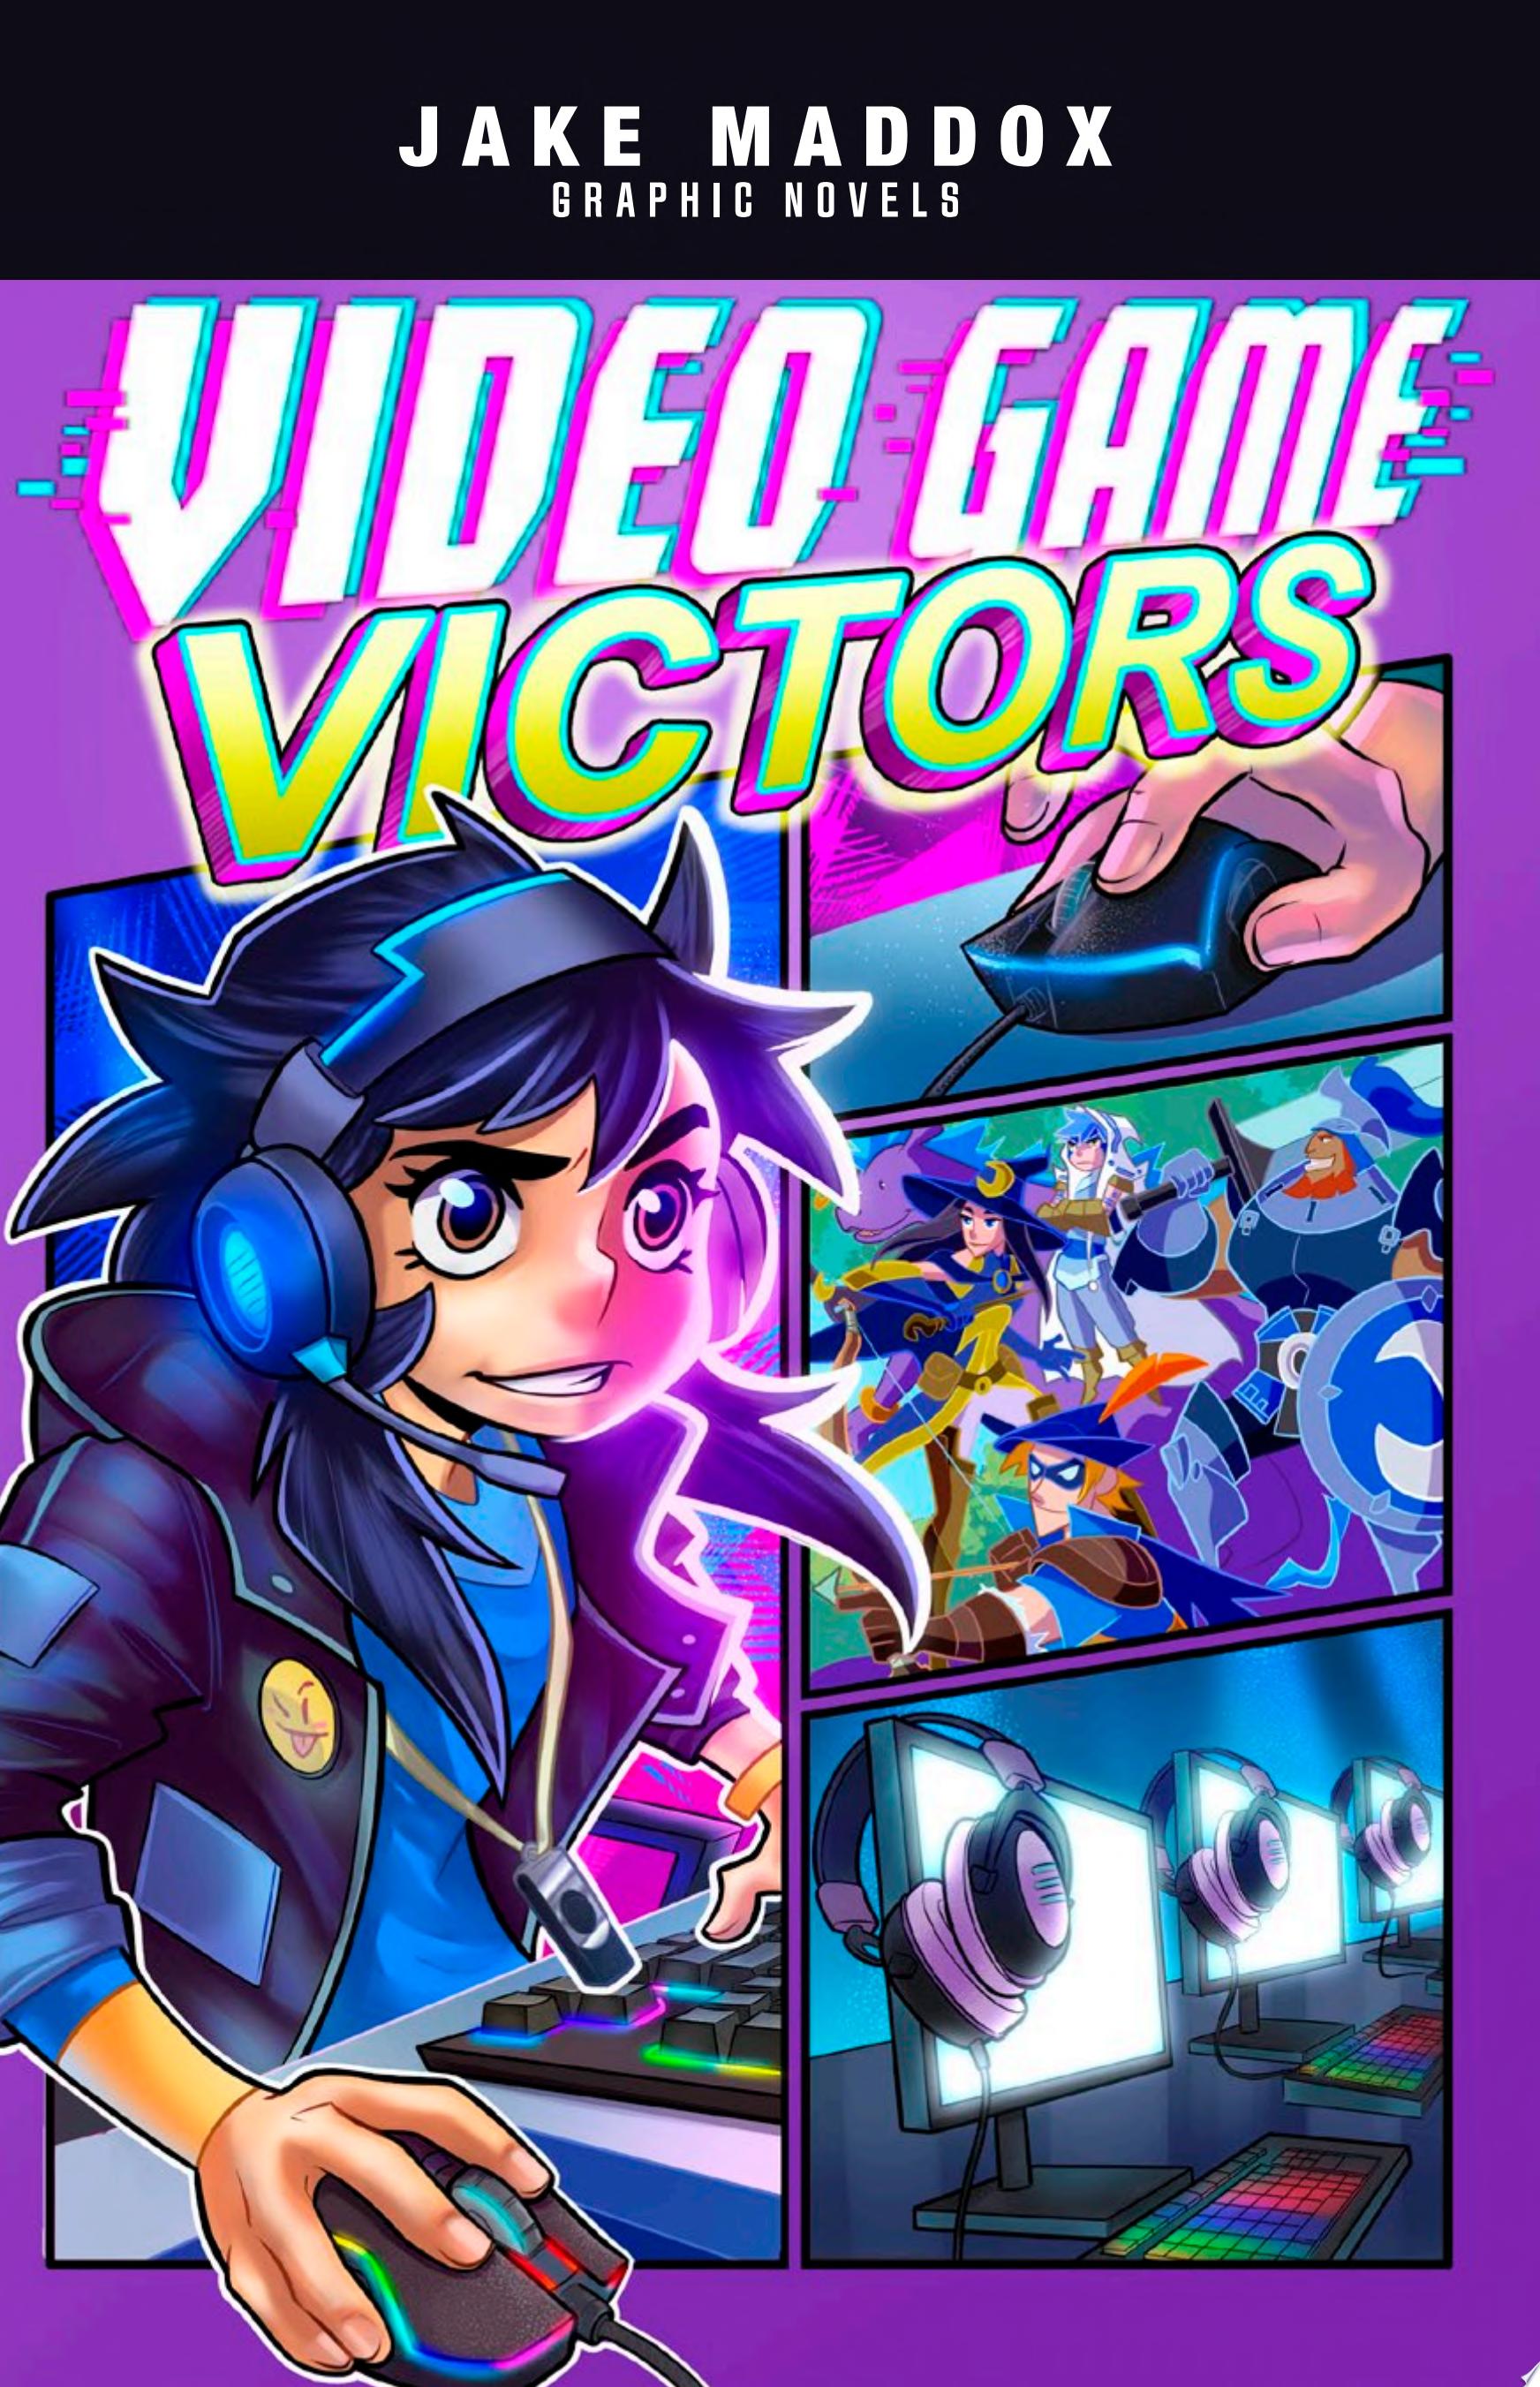 Image for "Video Game Victors"